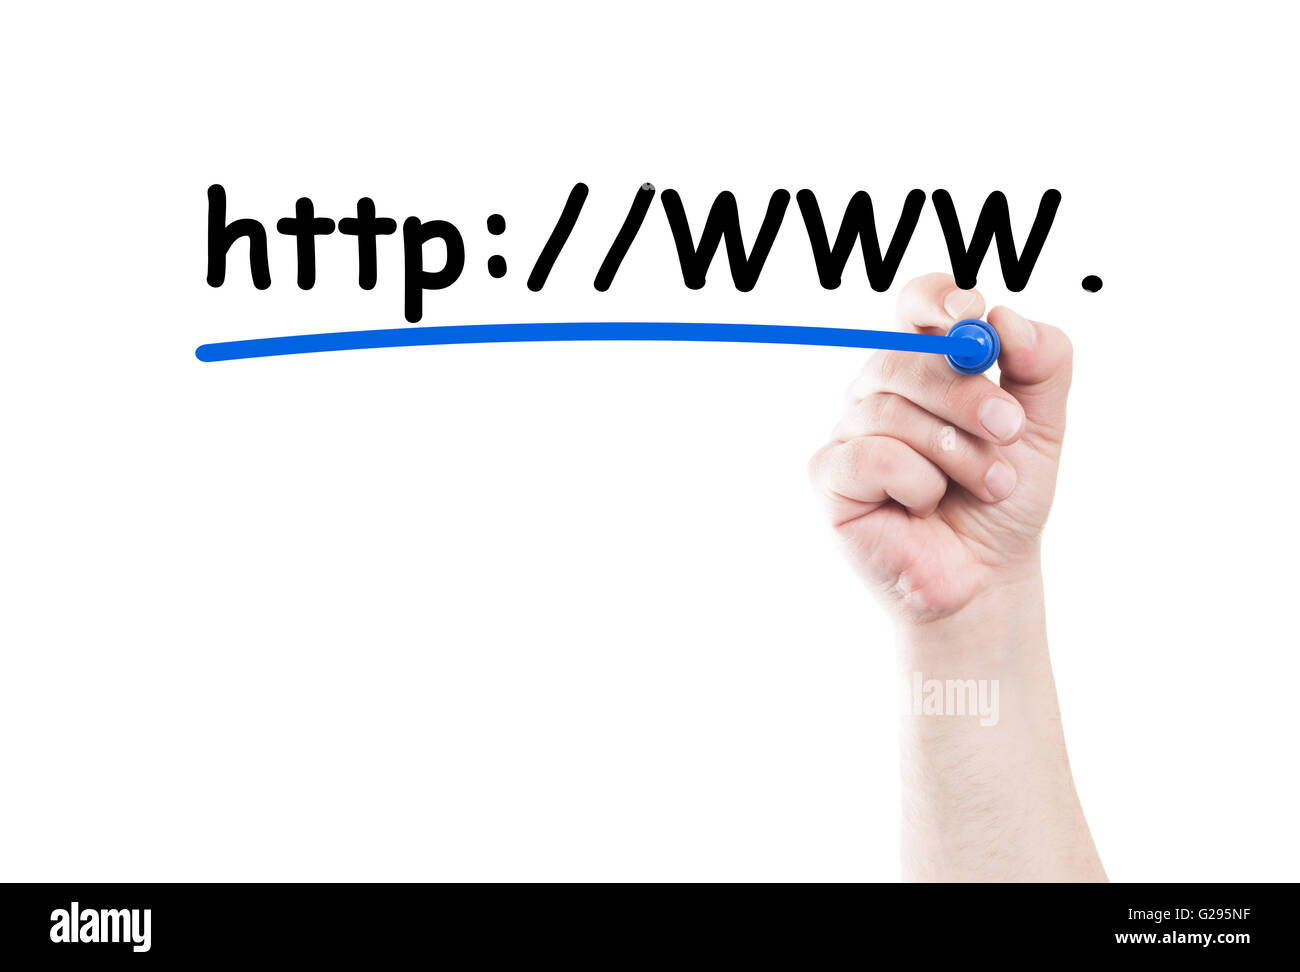 Url or web domain address concept written on transparent white wipe board with a hand holding a marker Stock Photo